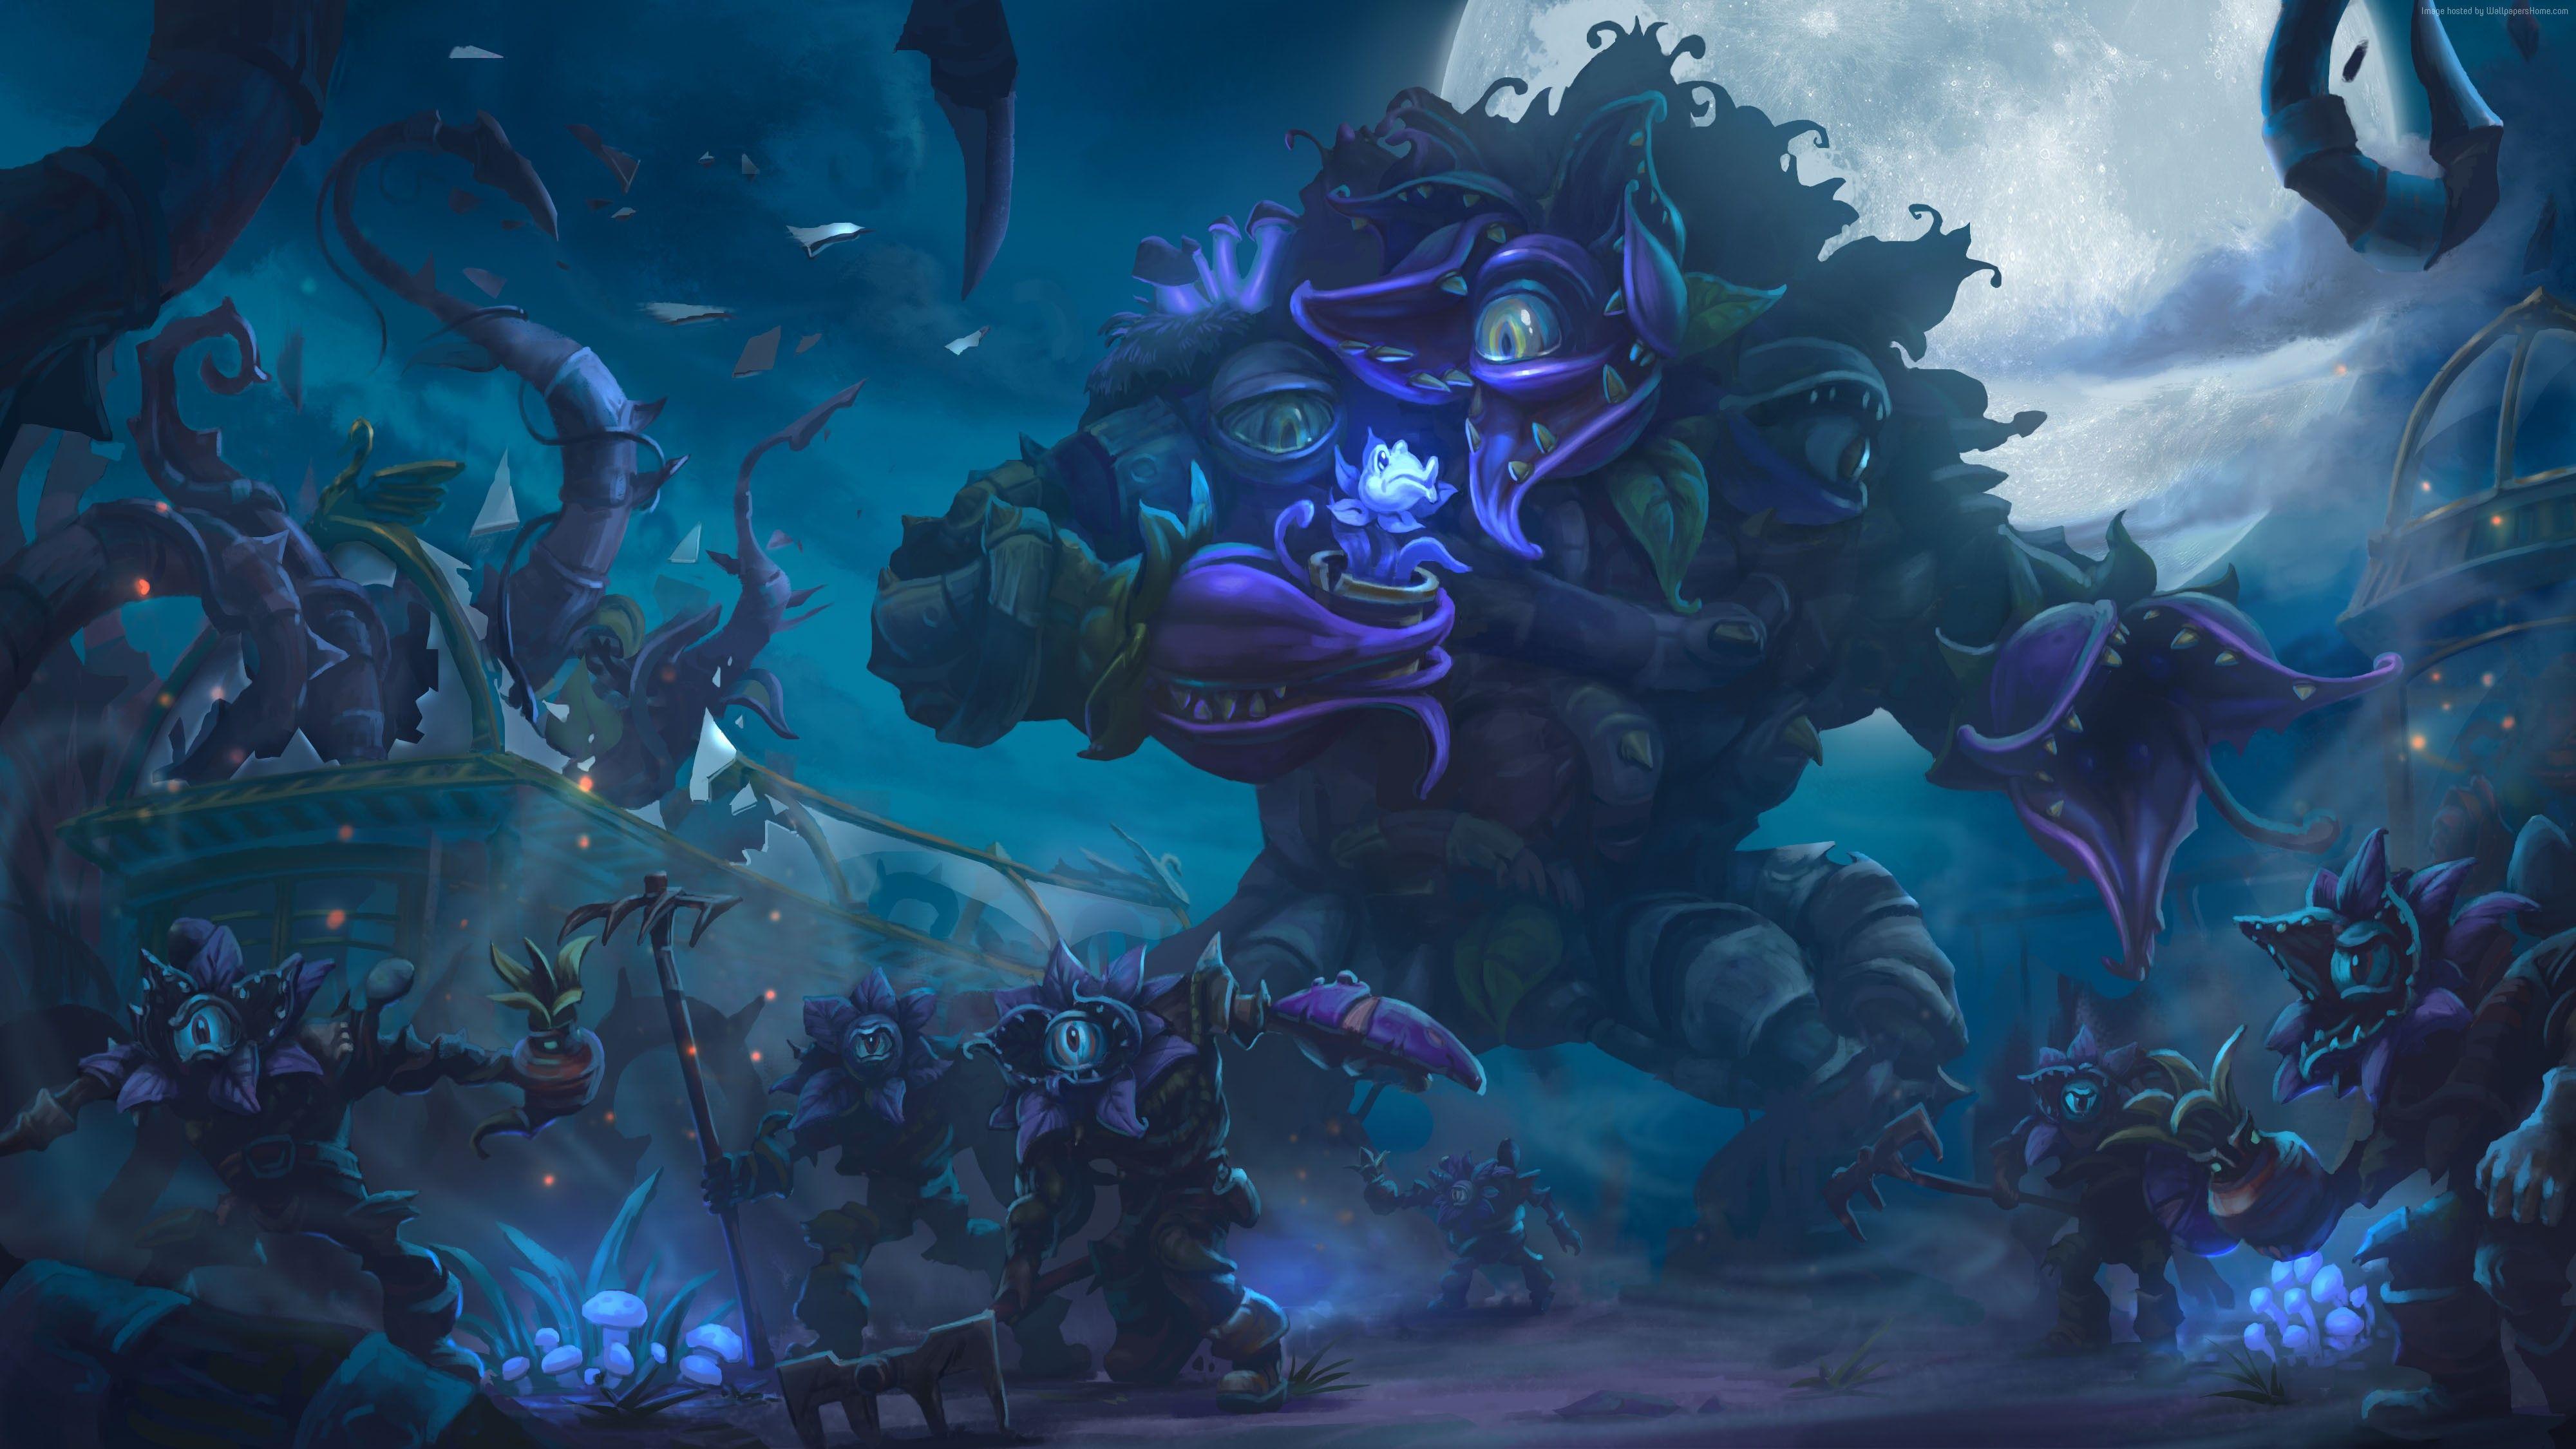 Heroes of the Storm Wallpaper, Art: Heroes of the Storm, 2015